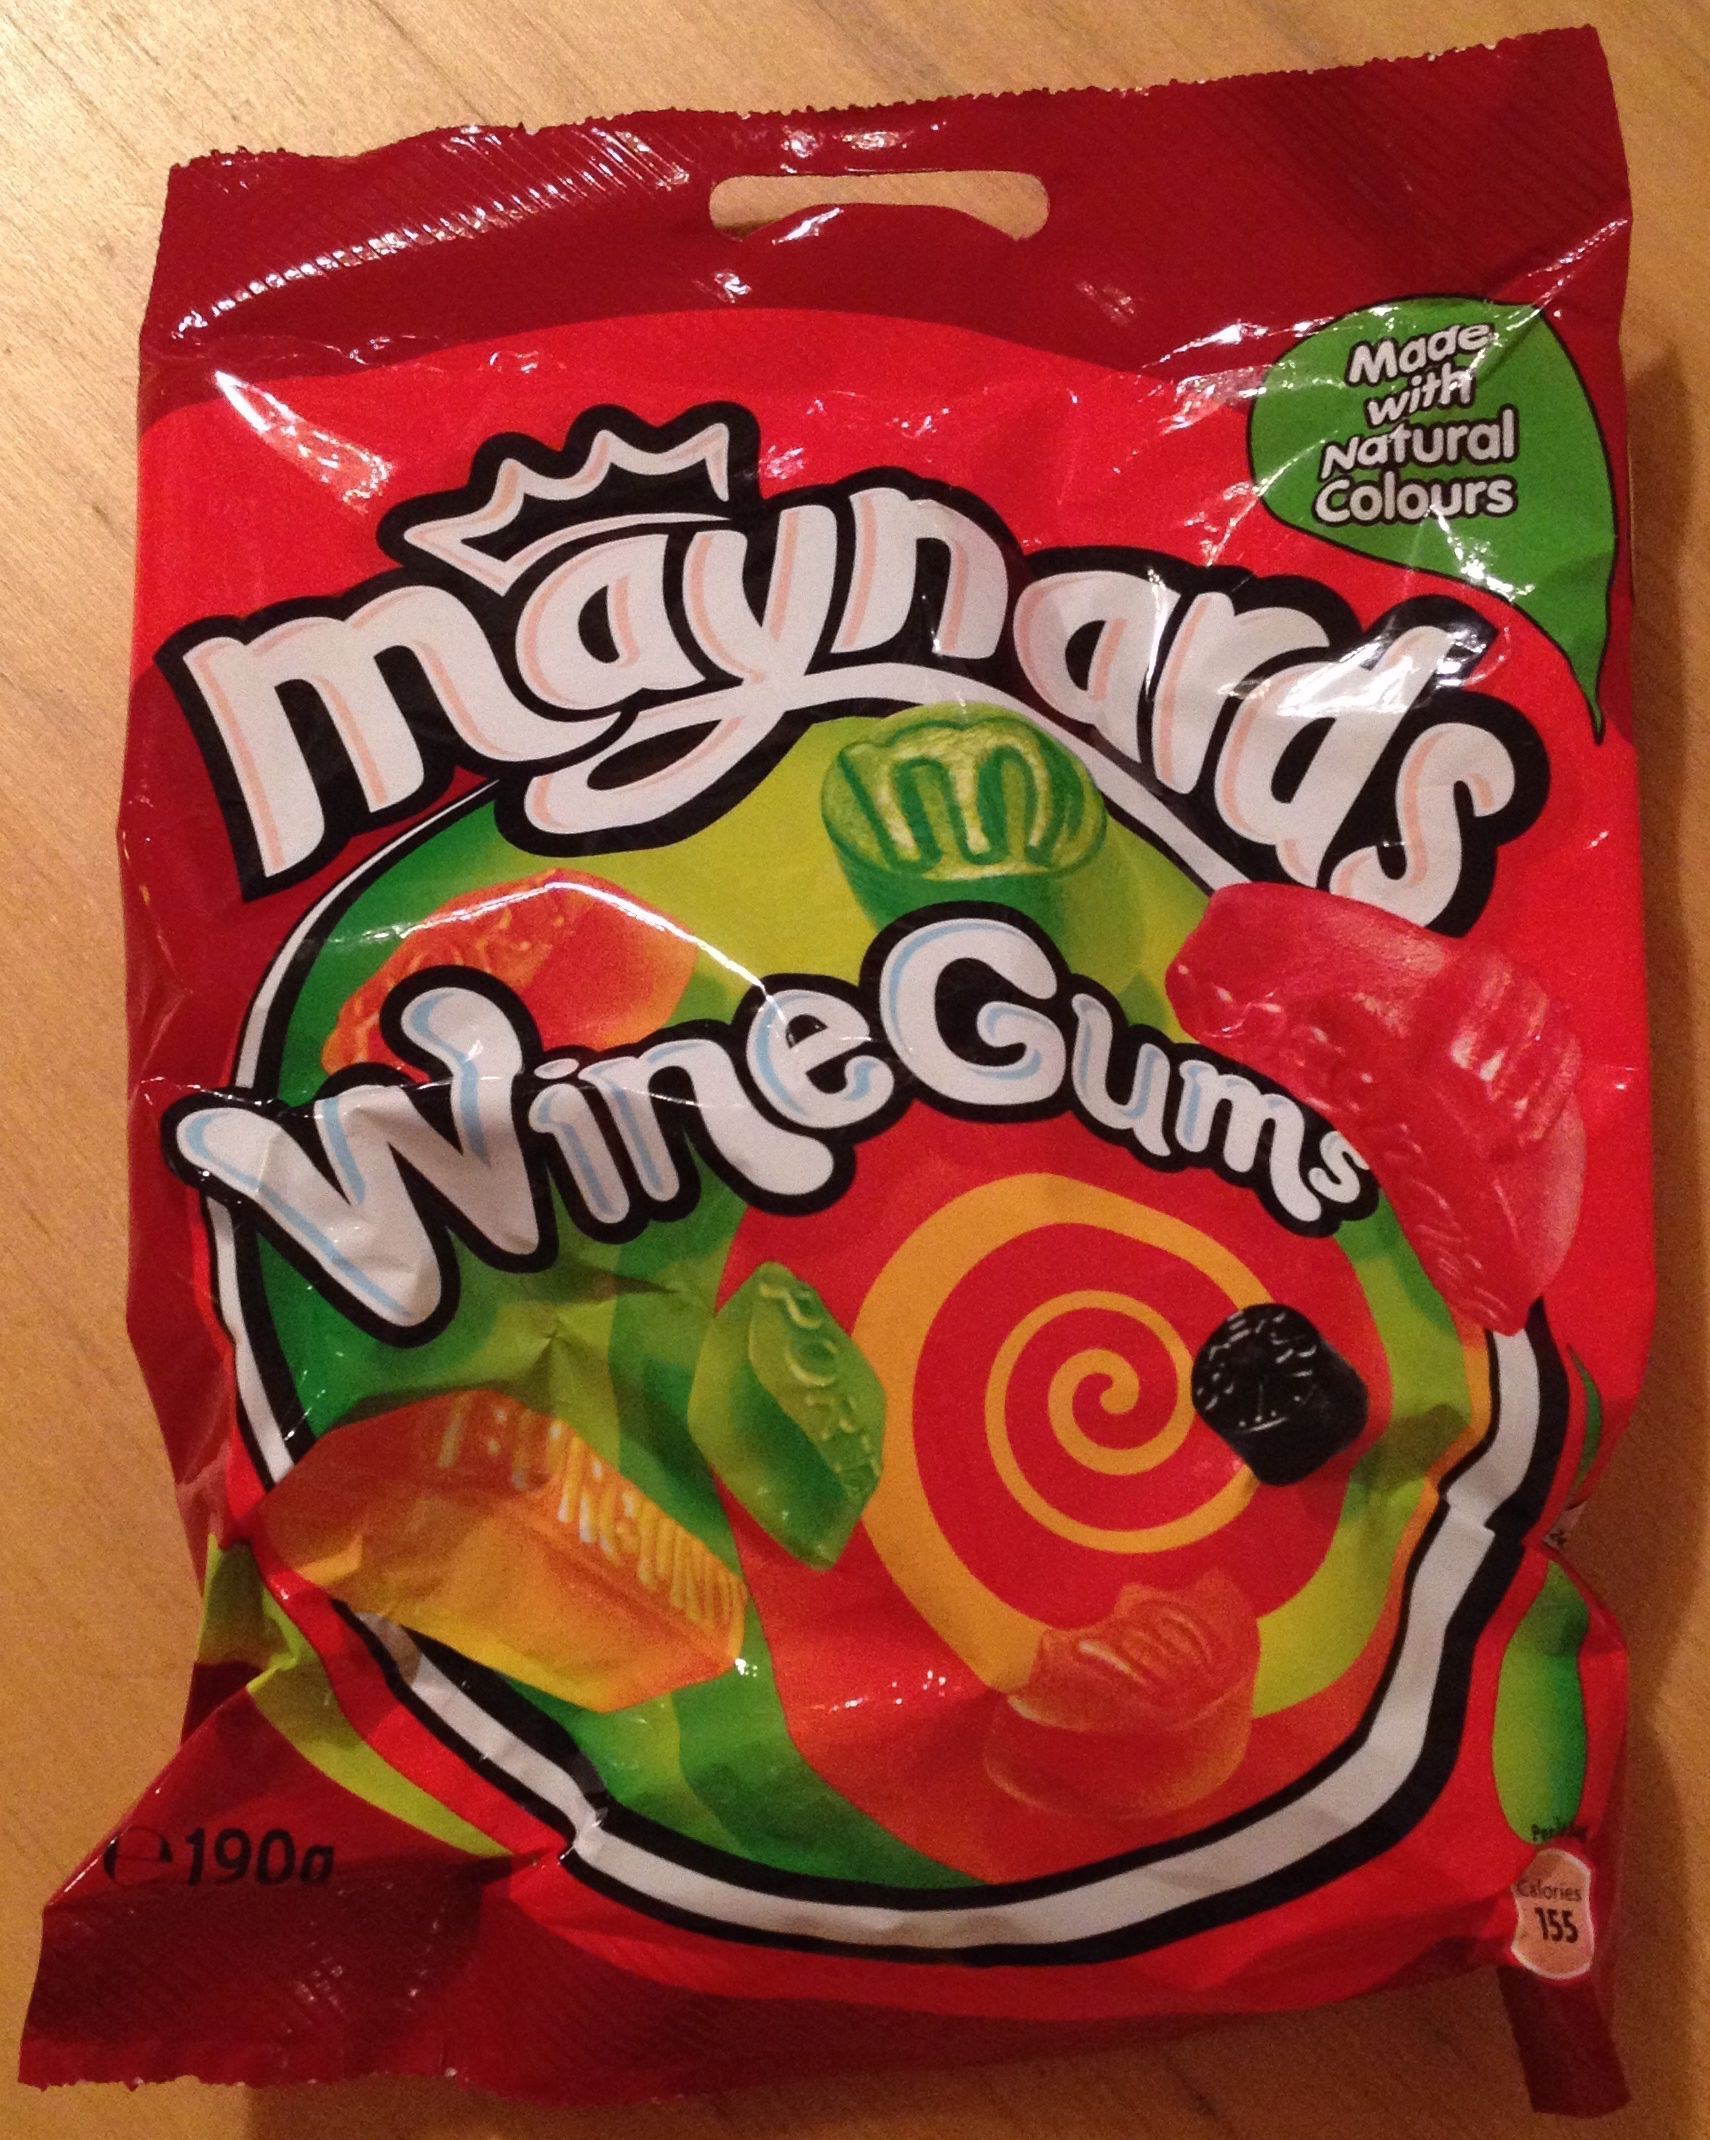 Are wine gums bad for you